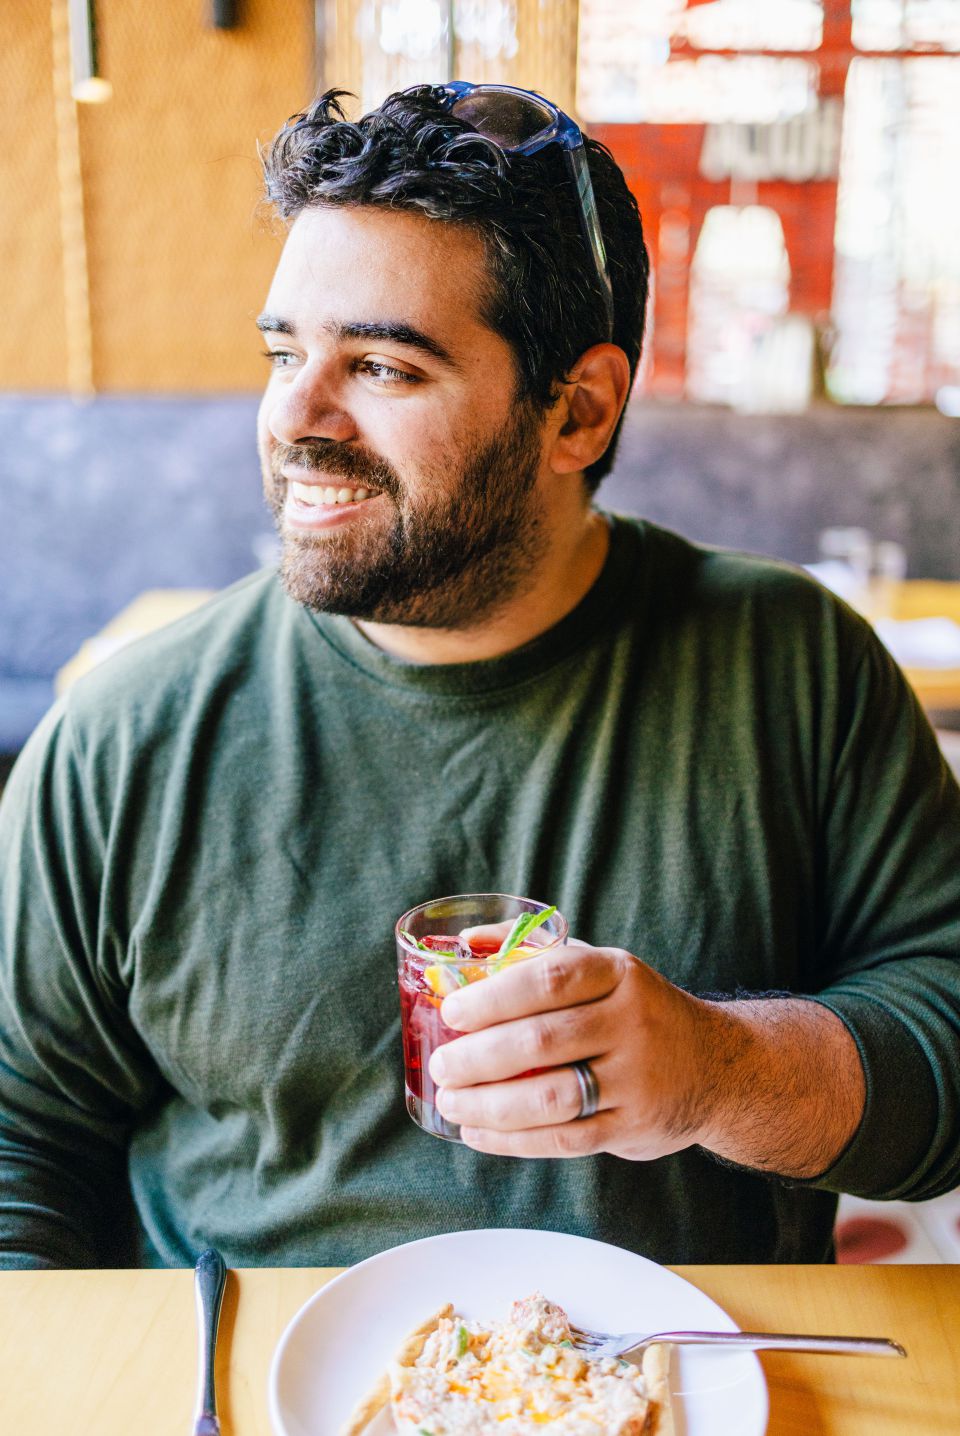 Bearded man in green shirt smiling and holding glass of sangria